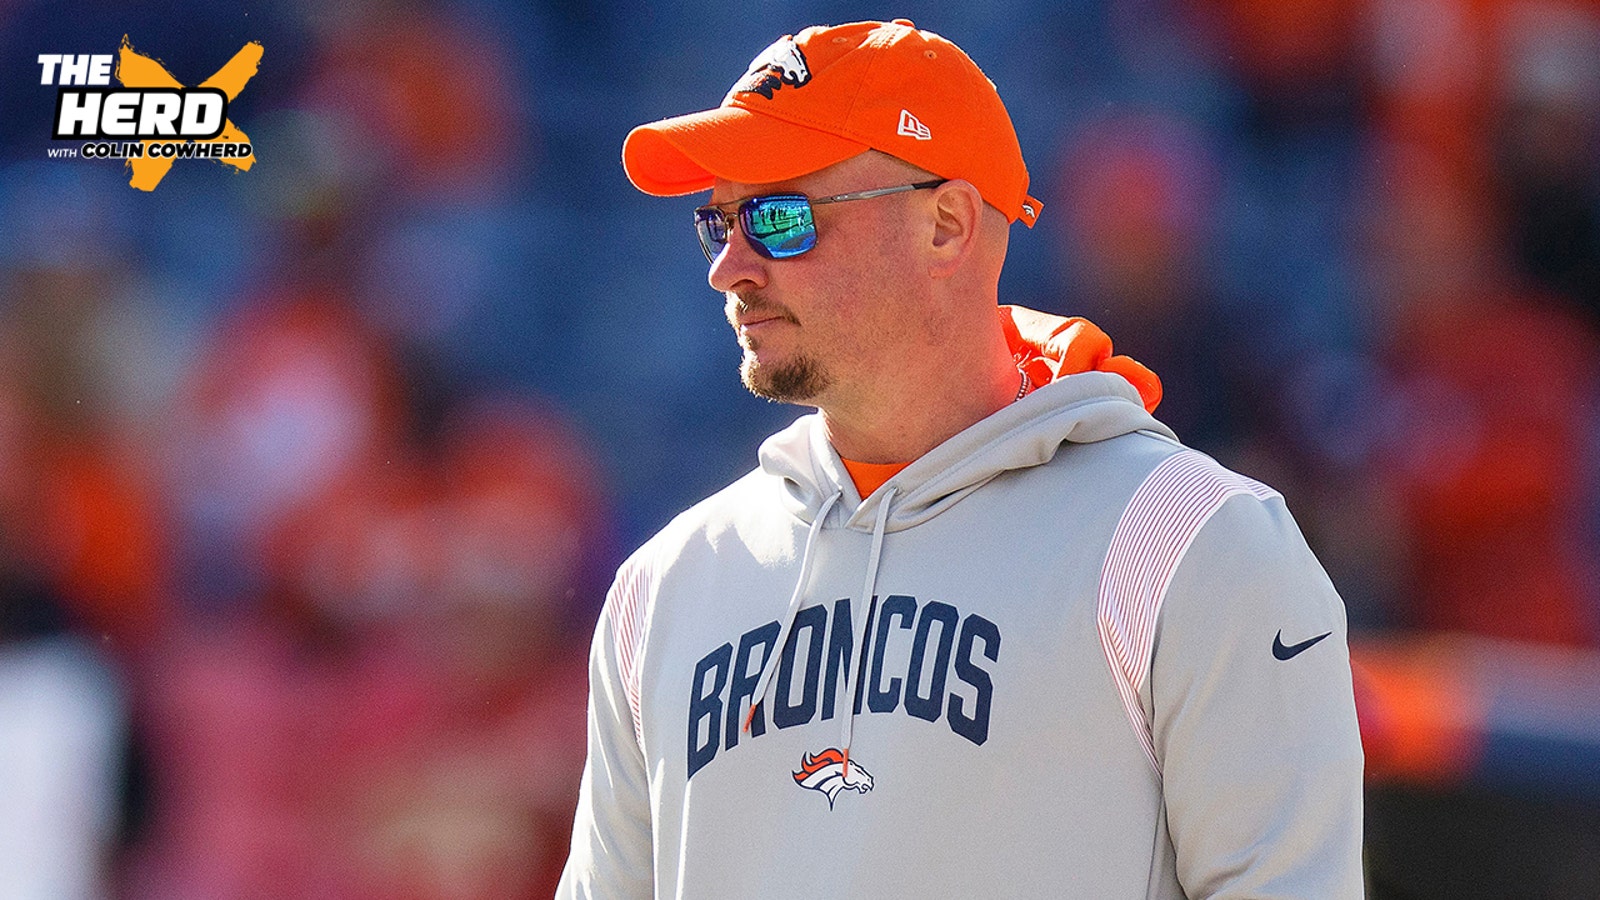 Who should Broncos hire to replace Nathaniel Hackett?